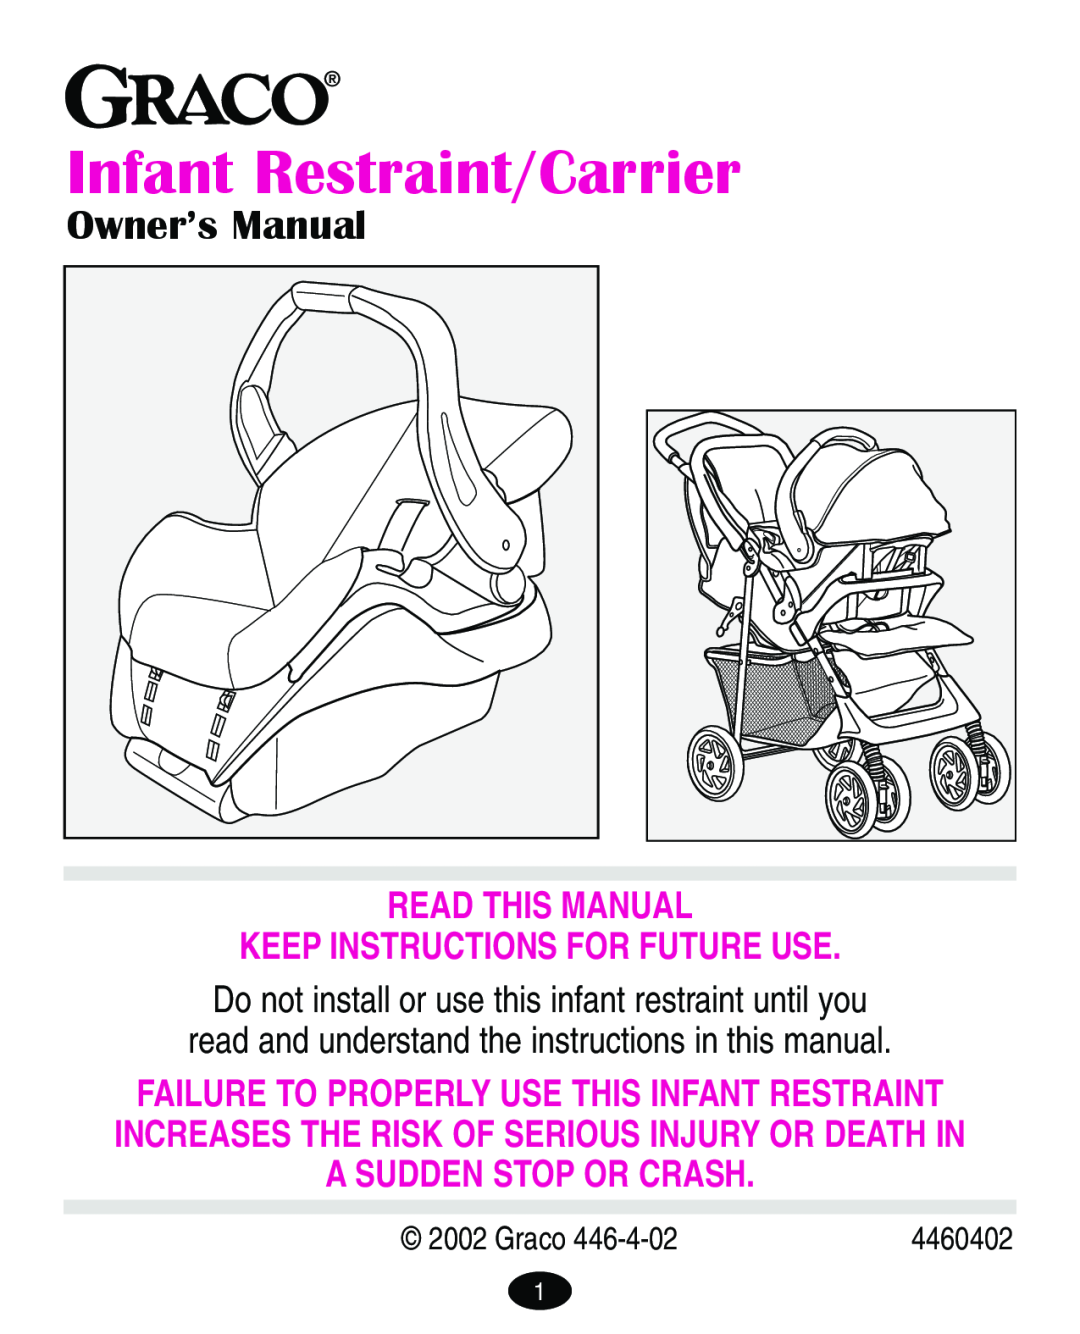 Graco 4460402 manual Owner’s Manual, Read This Manual Keep Instructions For Future Use, Infant Restraint/Carrier, Graco 